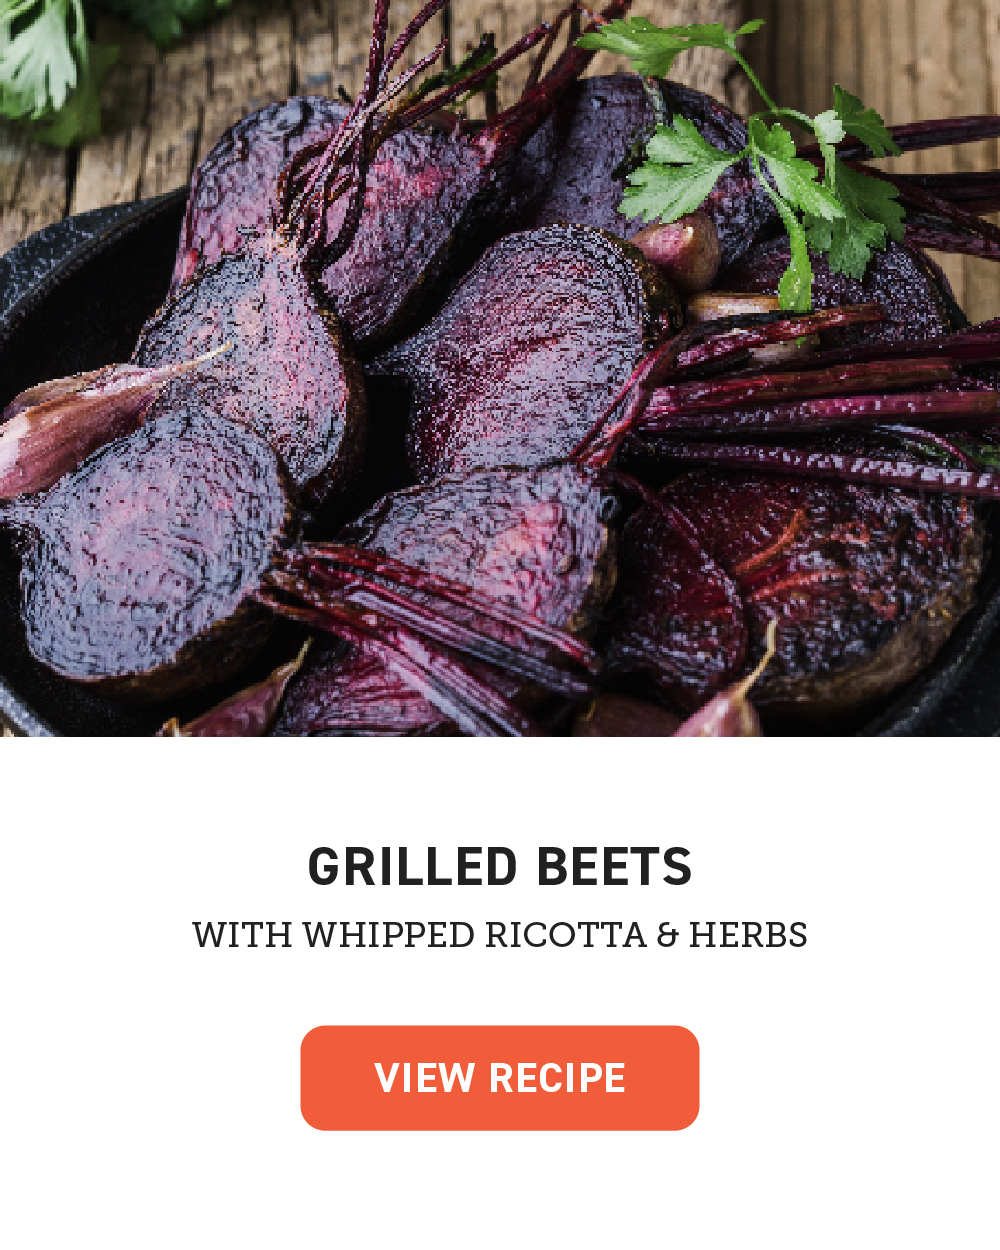 aeroblaze indoor grill Grilled Beets with Whipped Ricotta & Herbs